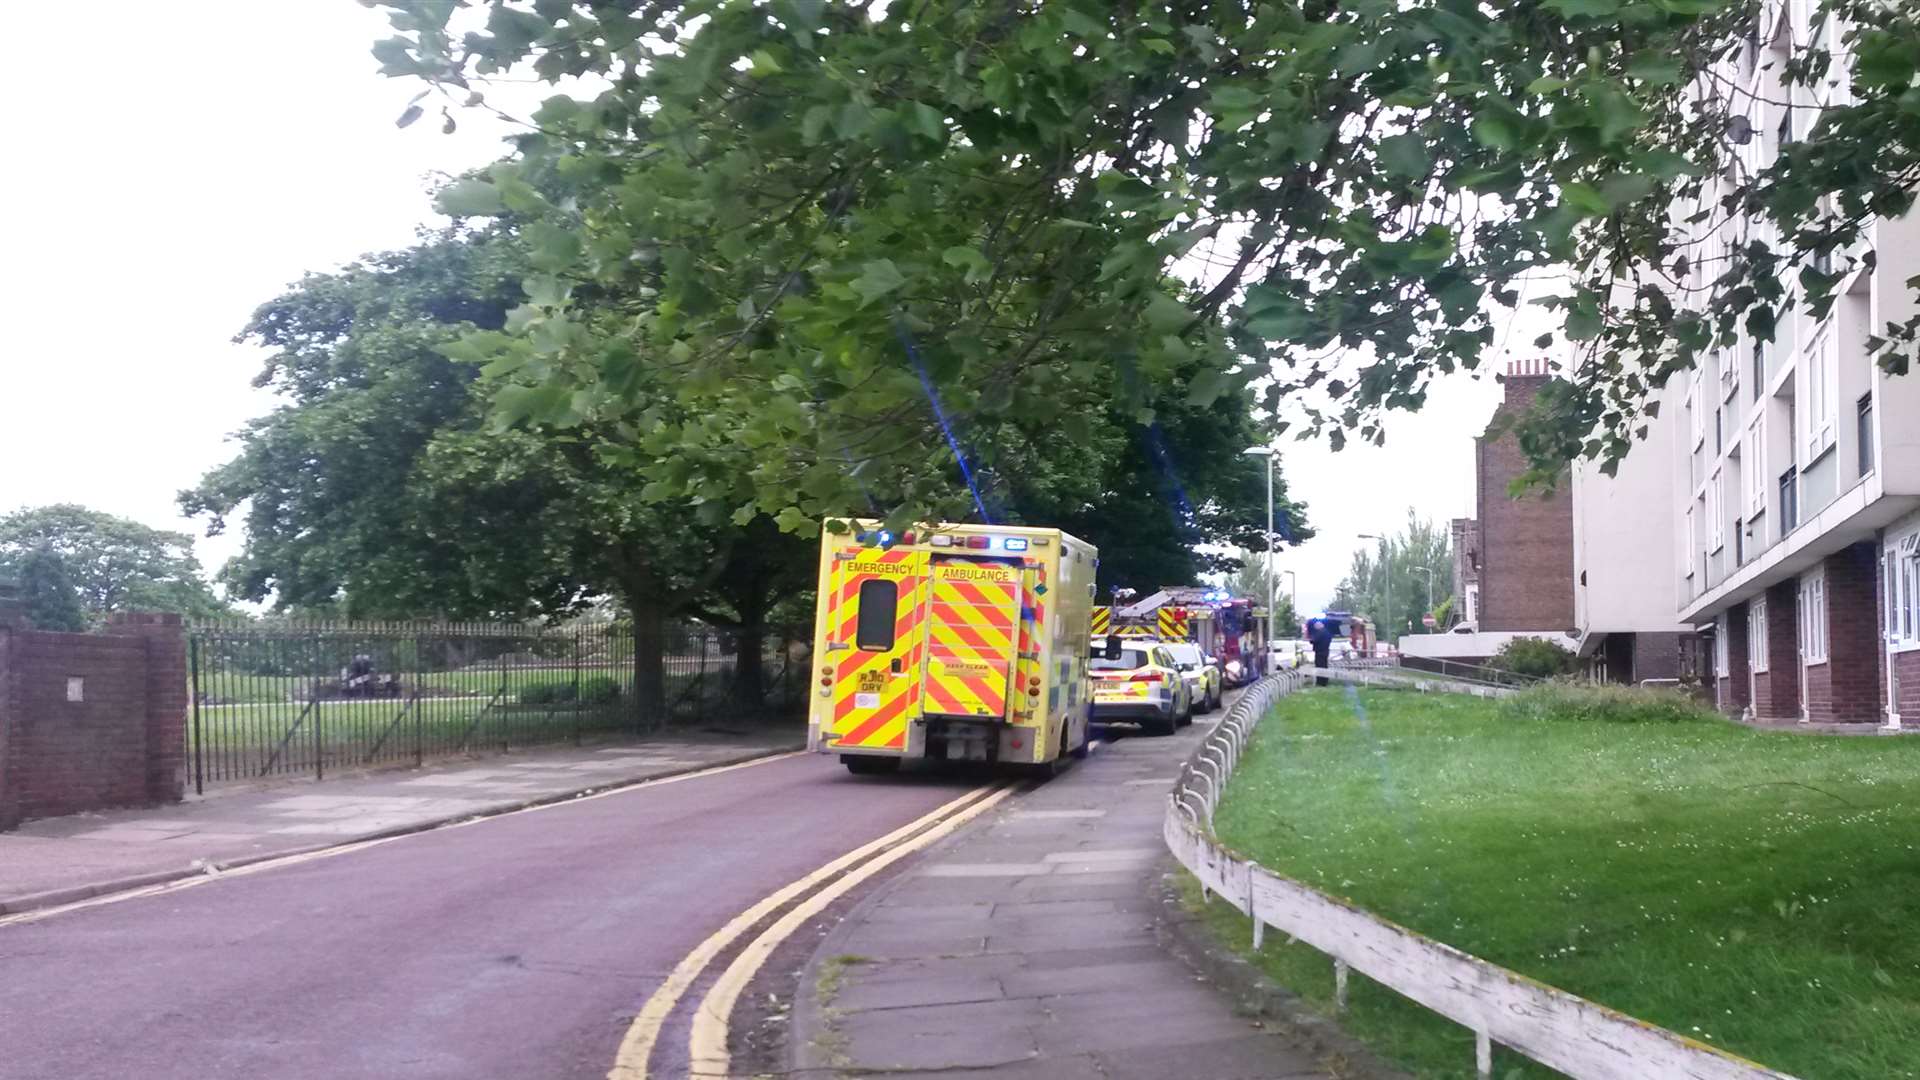 Ambulances are also near Chantry Court